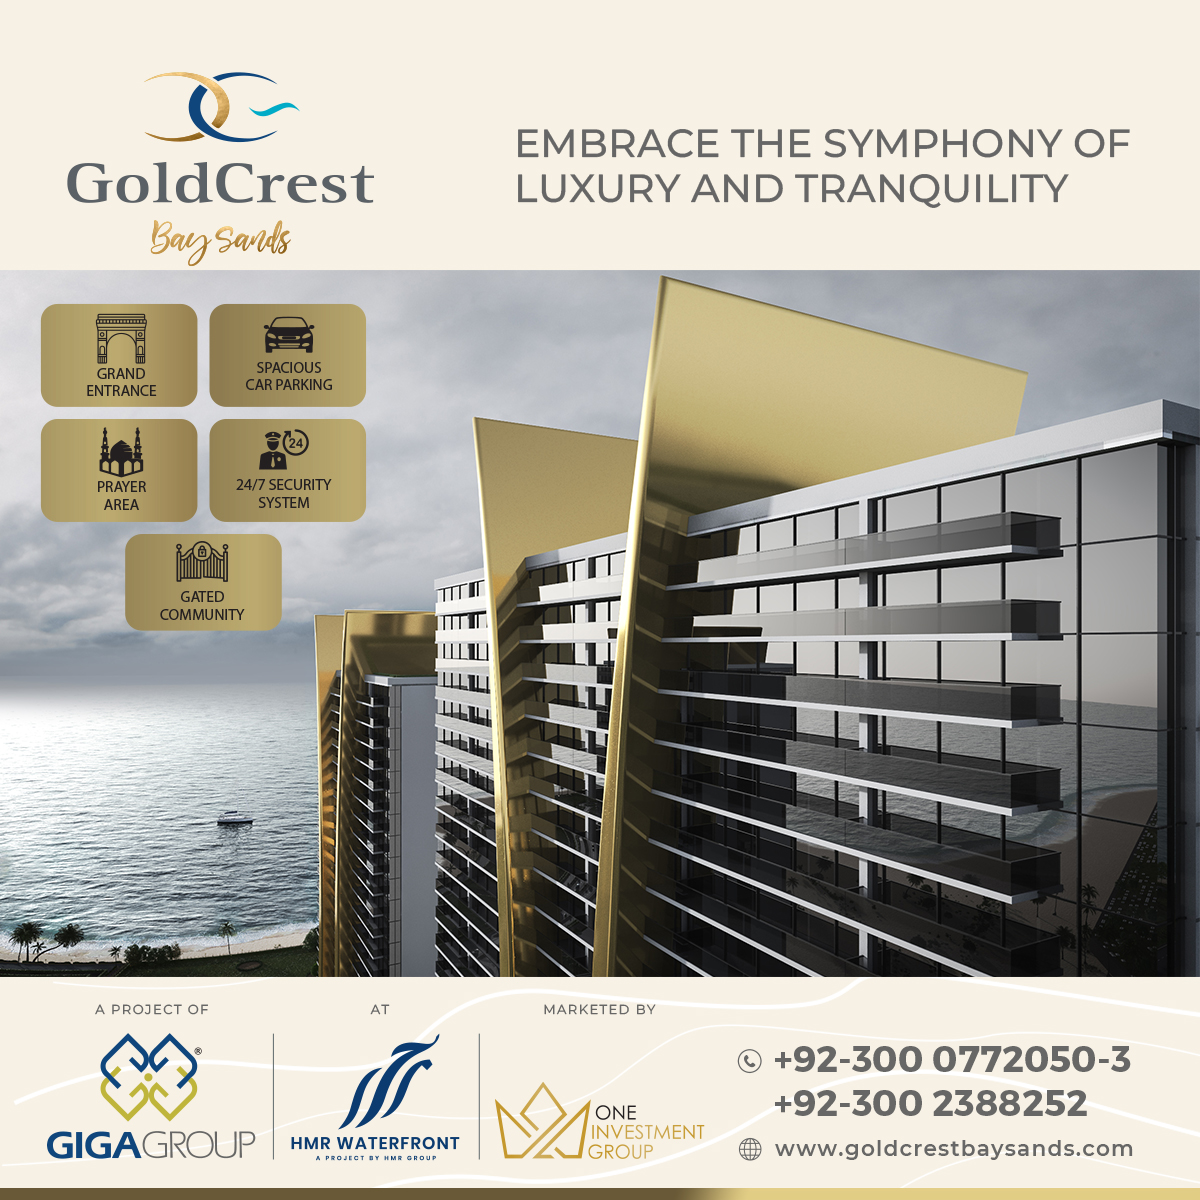 This is the world we invite you to step into. A world where you can unwind and reconnect with yourself, surrounded by beauty, comfort, and security.

#goldcrestbaysands #gigagroup #hmrwaterfront #karachi #dhaphase8 #pakistan #propertydevelopment #propertyinvestment #oceanfront